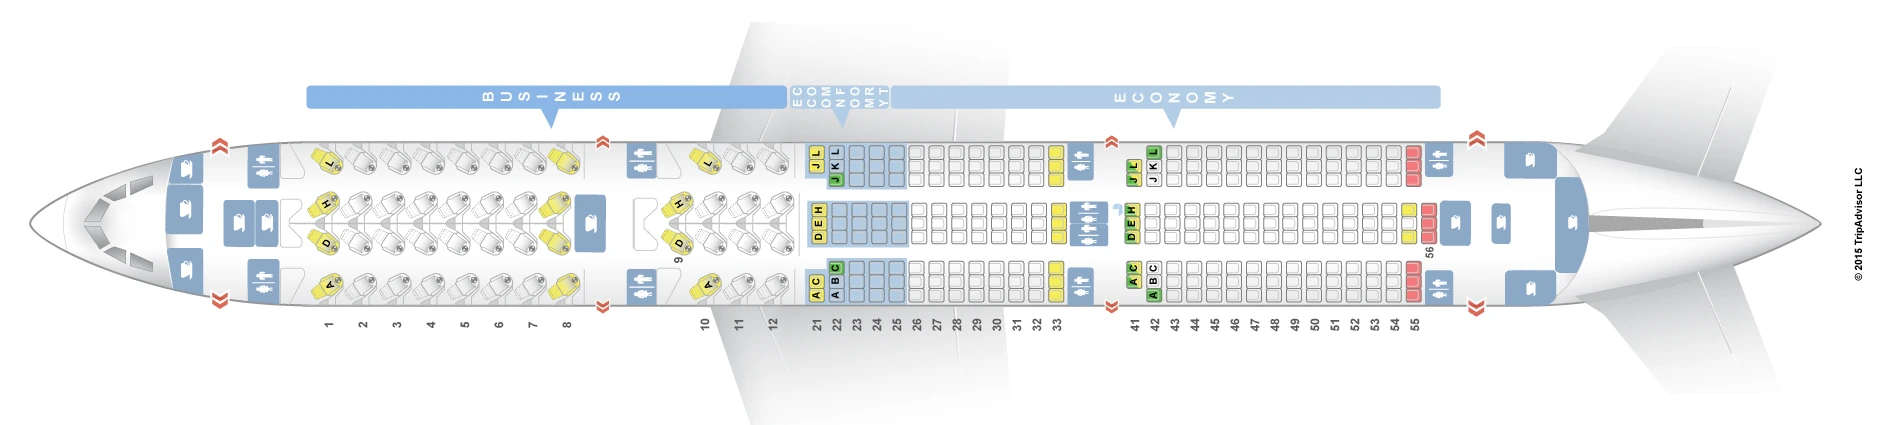 airbus a350-900 seat map